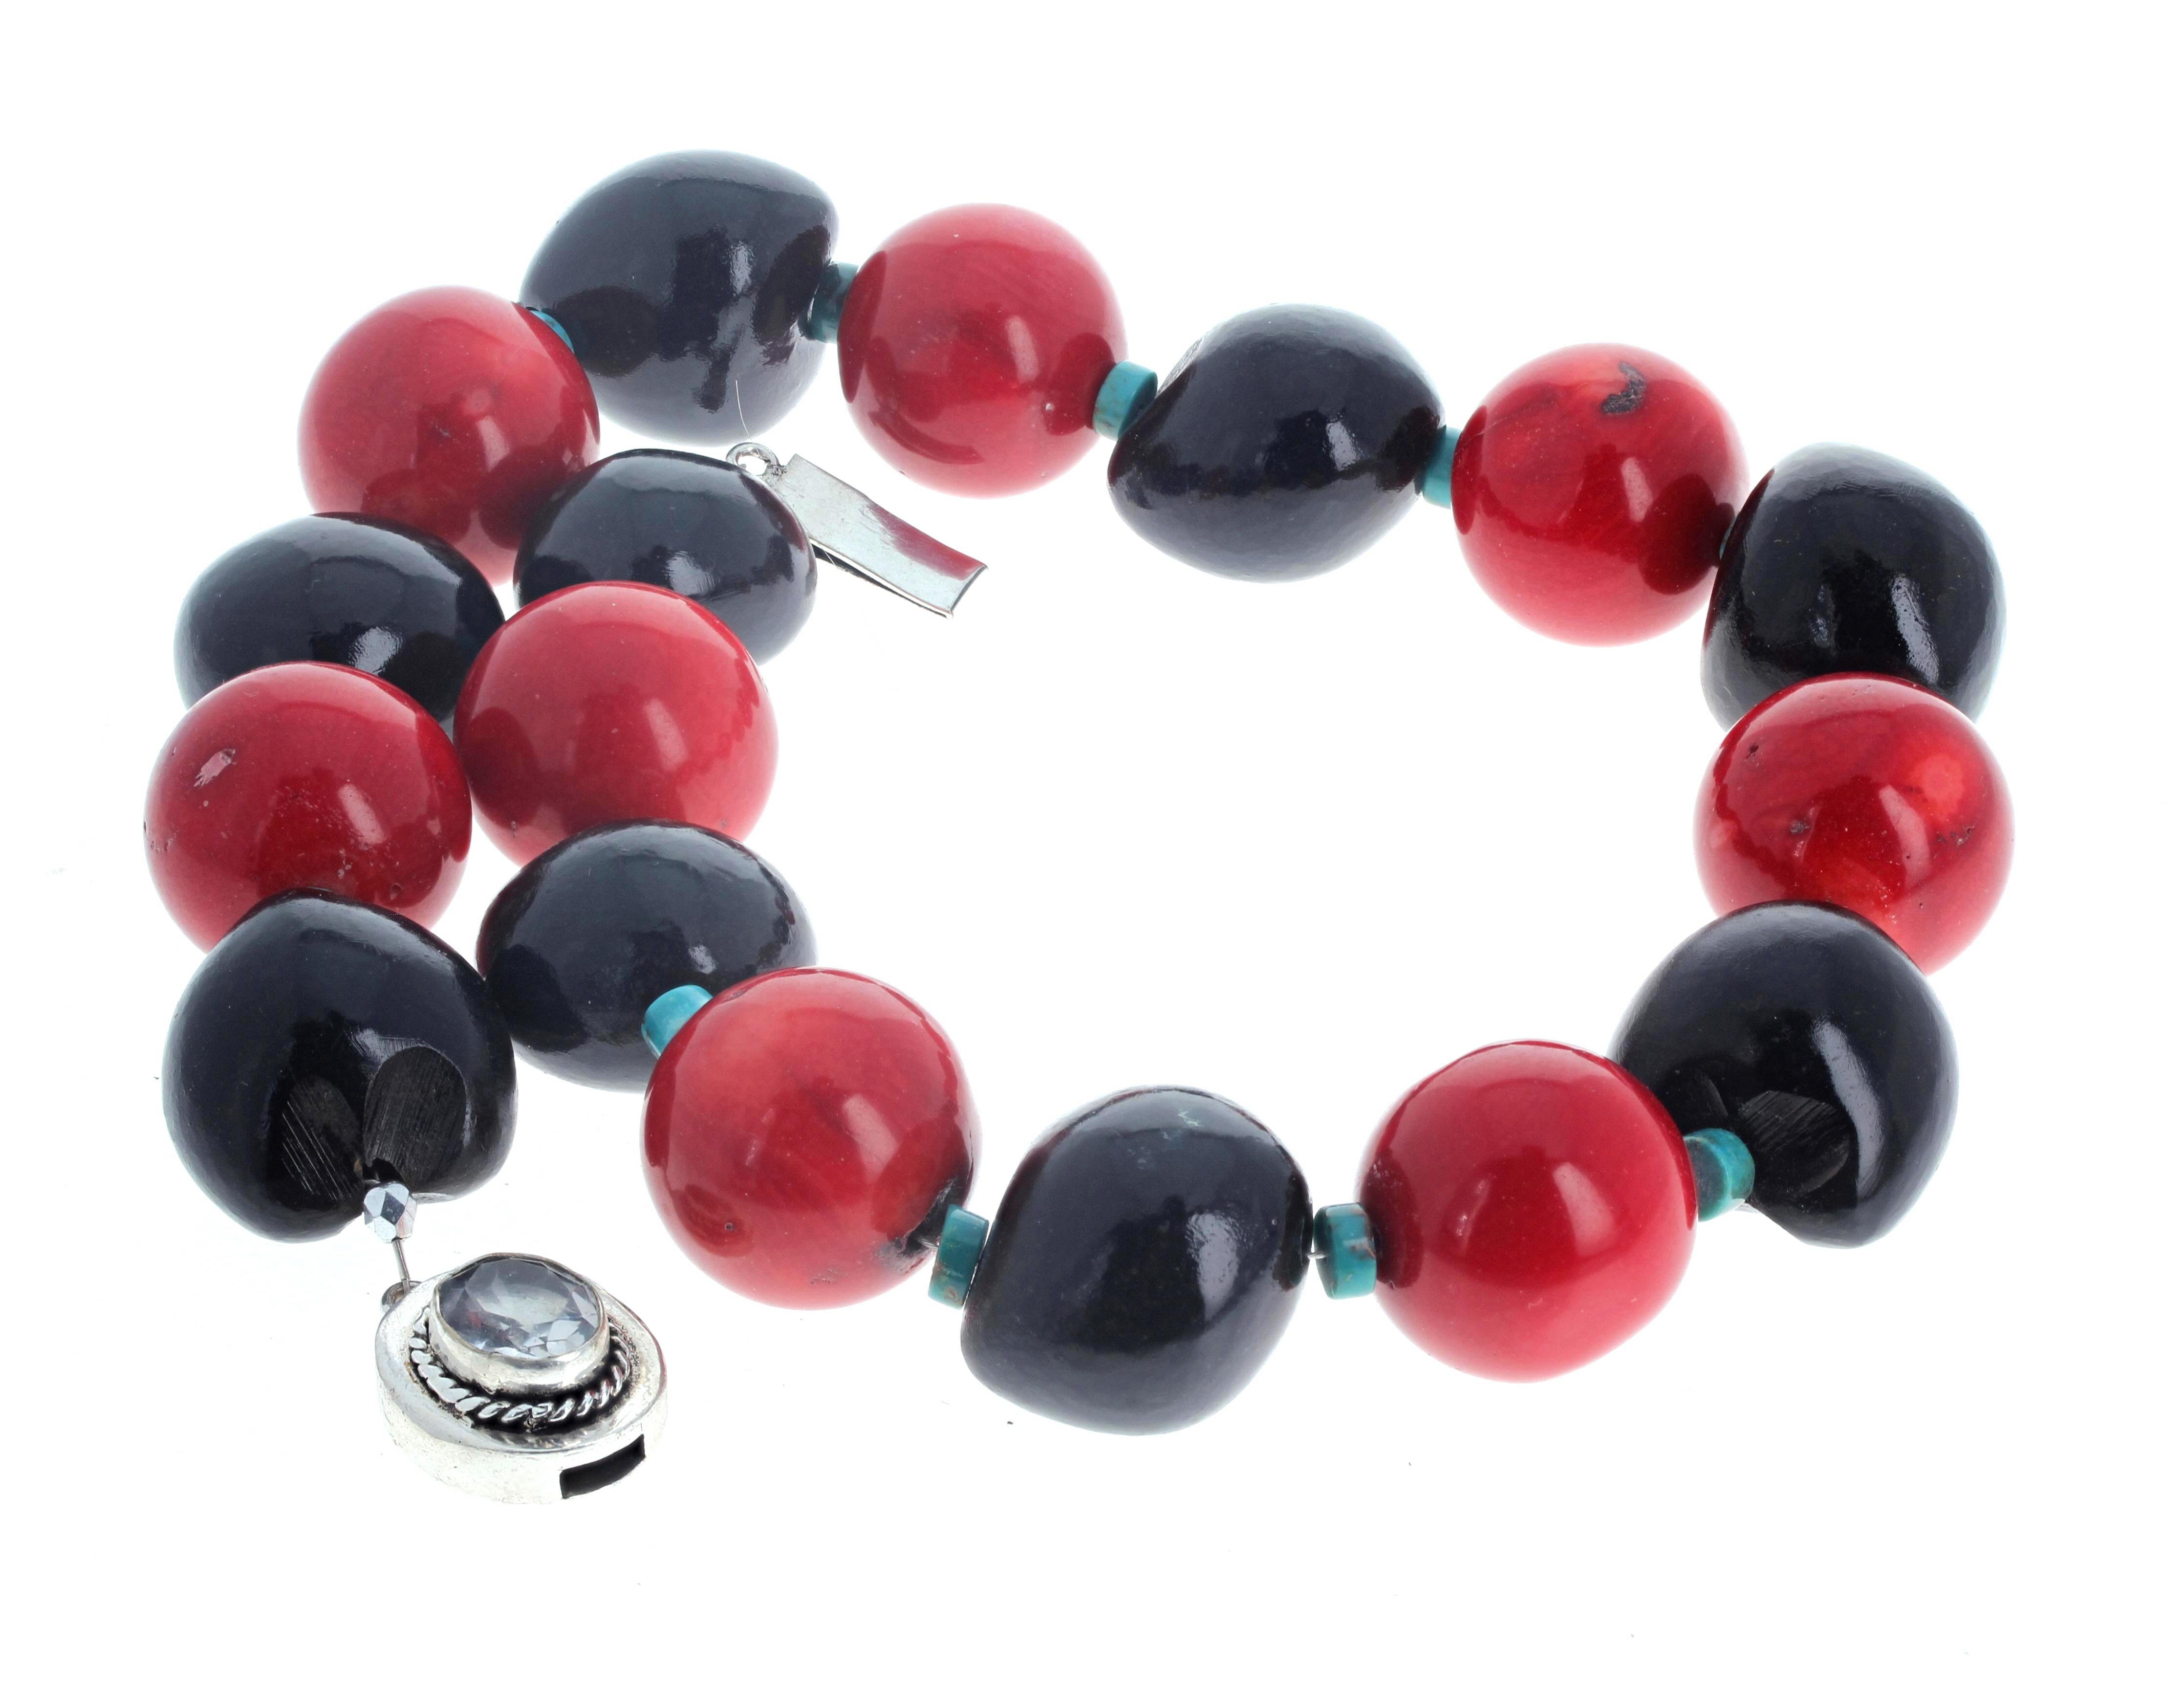 This VERY Large 18 1/2 inches long necklace is very dramatic.  The artistic black Wood rondels are different sizes but approximately 23mm x 24mm.  The highly polished natural real red round Coral are approximately 23mm.  The little lovely blue